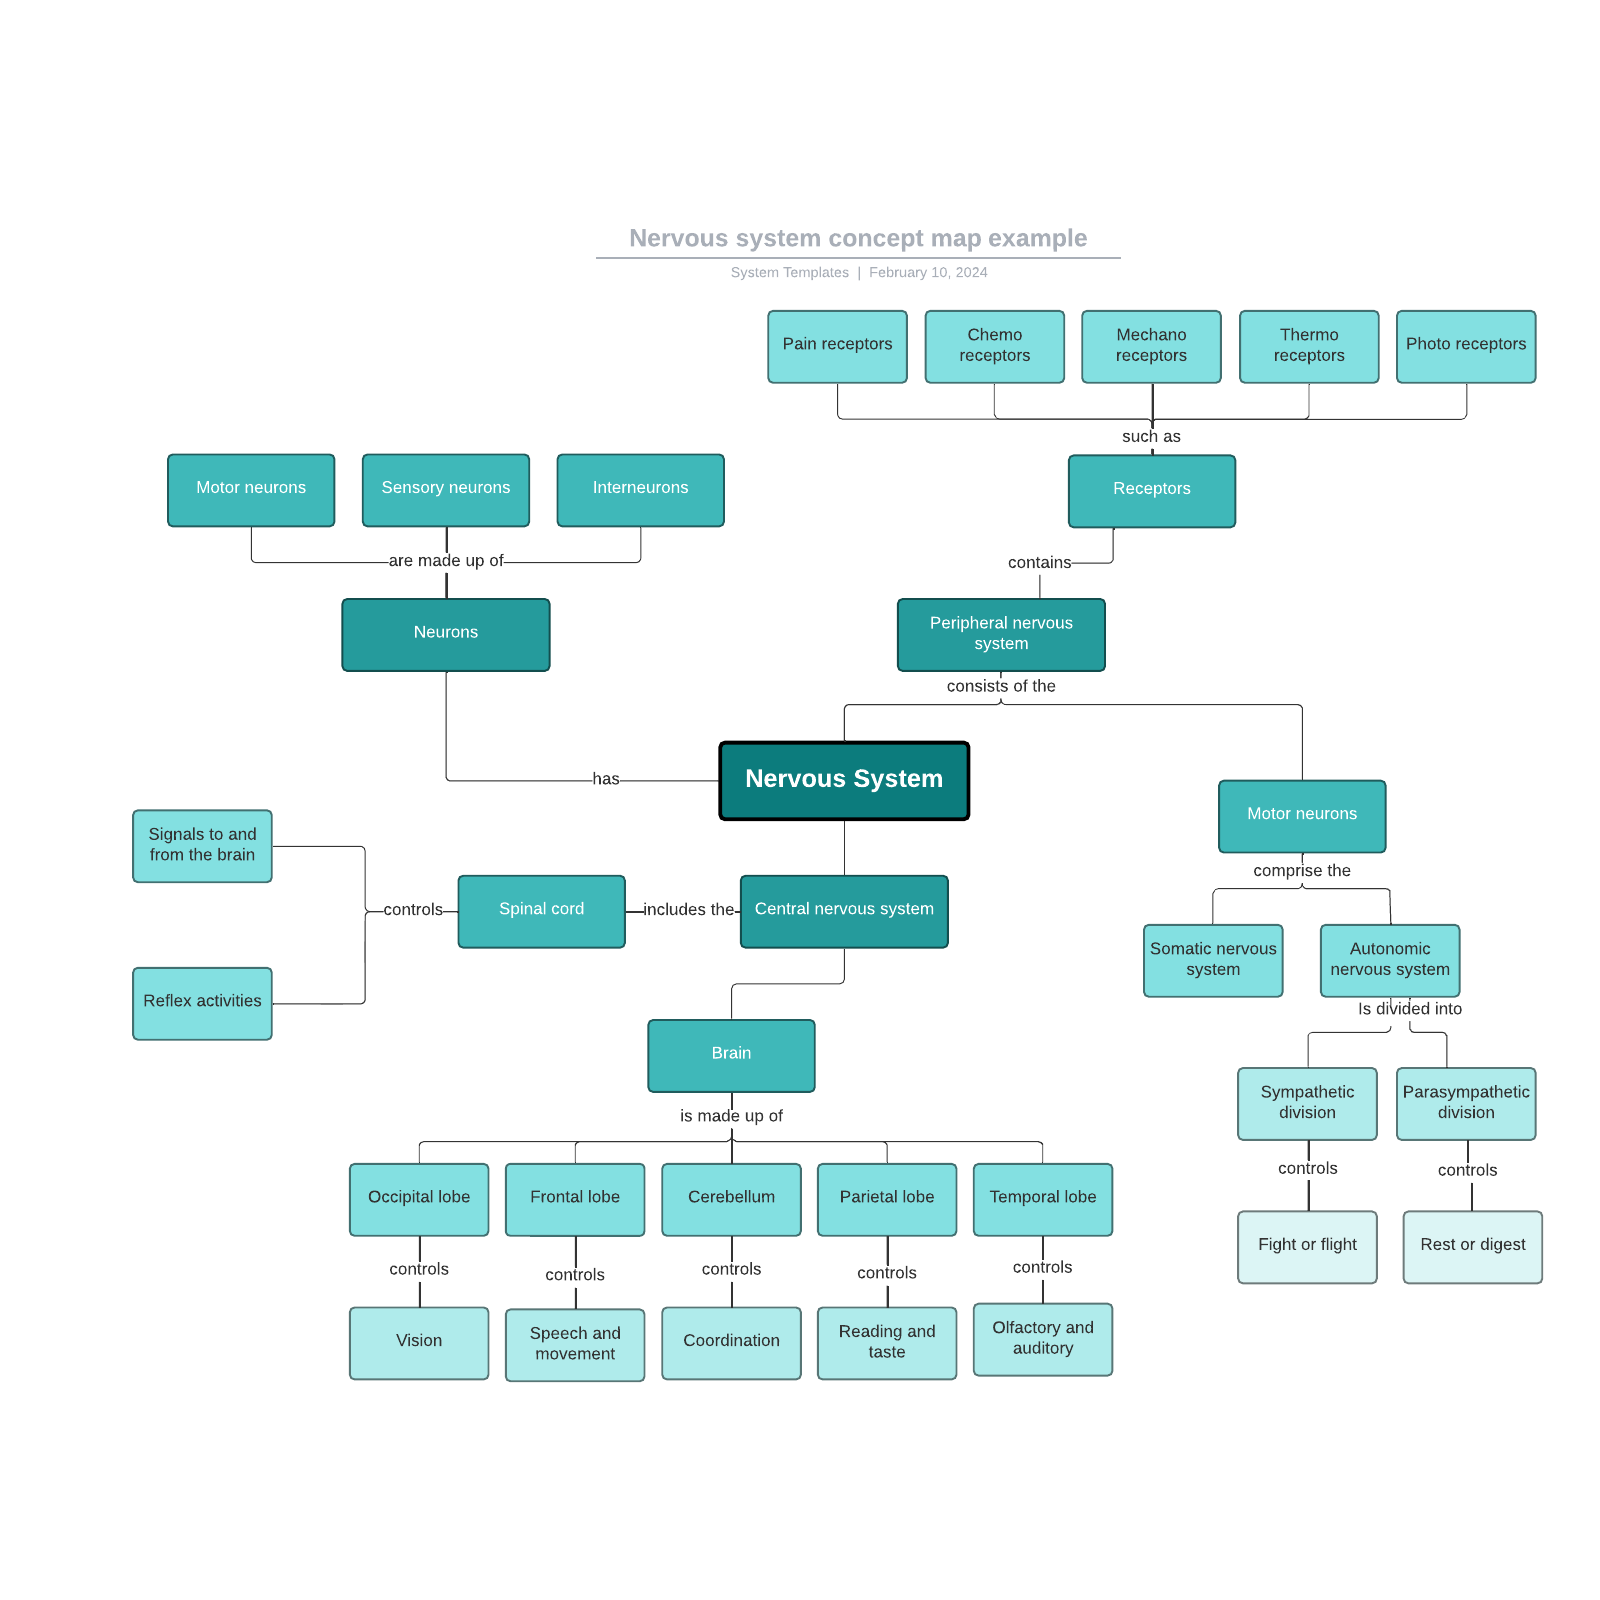 Nervous system concept map example example